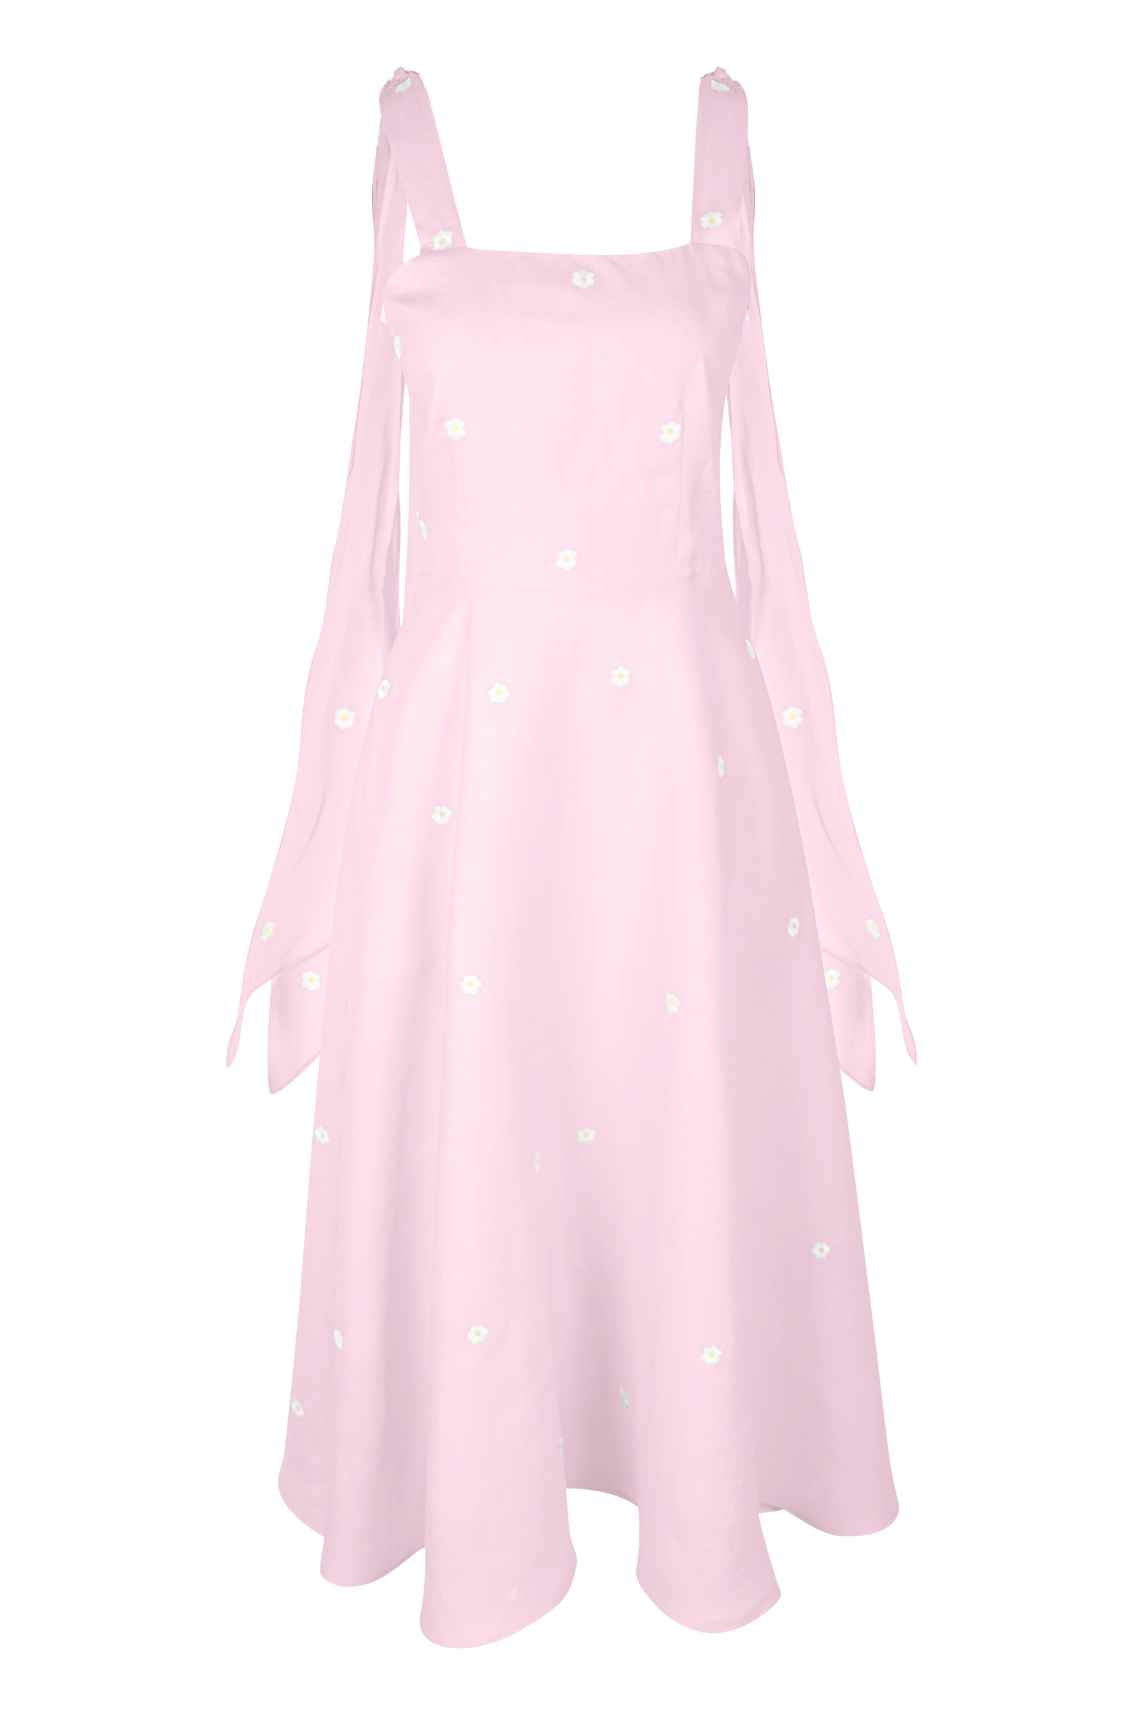 Fanm Mon x Over The Moon Shayna Dress In Light Pink with Floral Embroidery